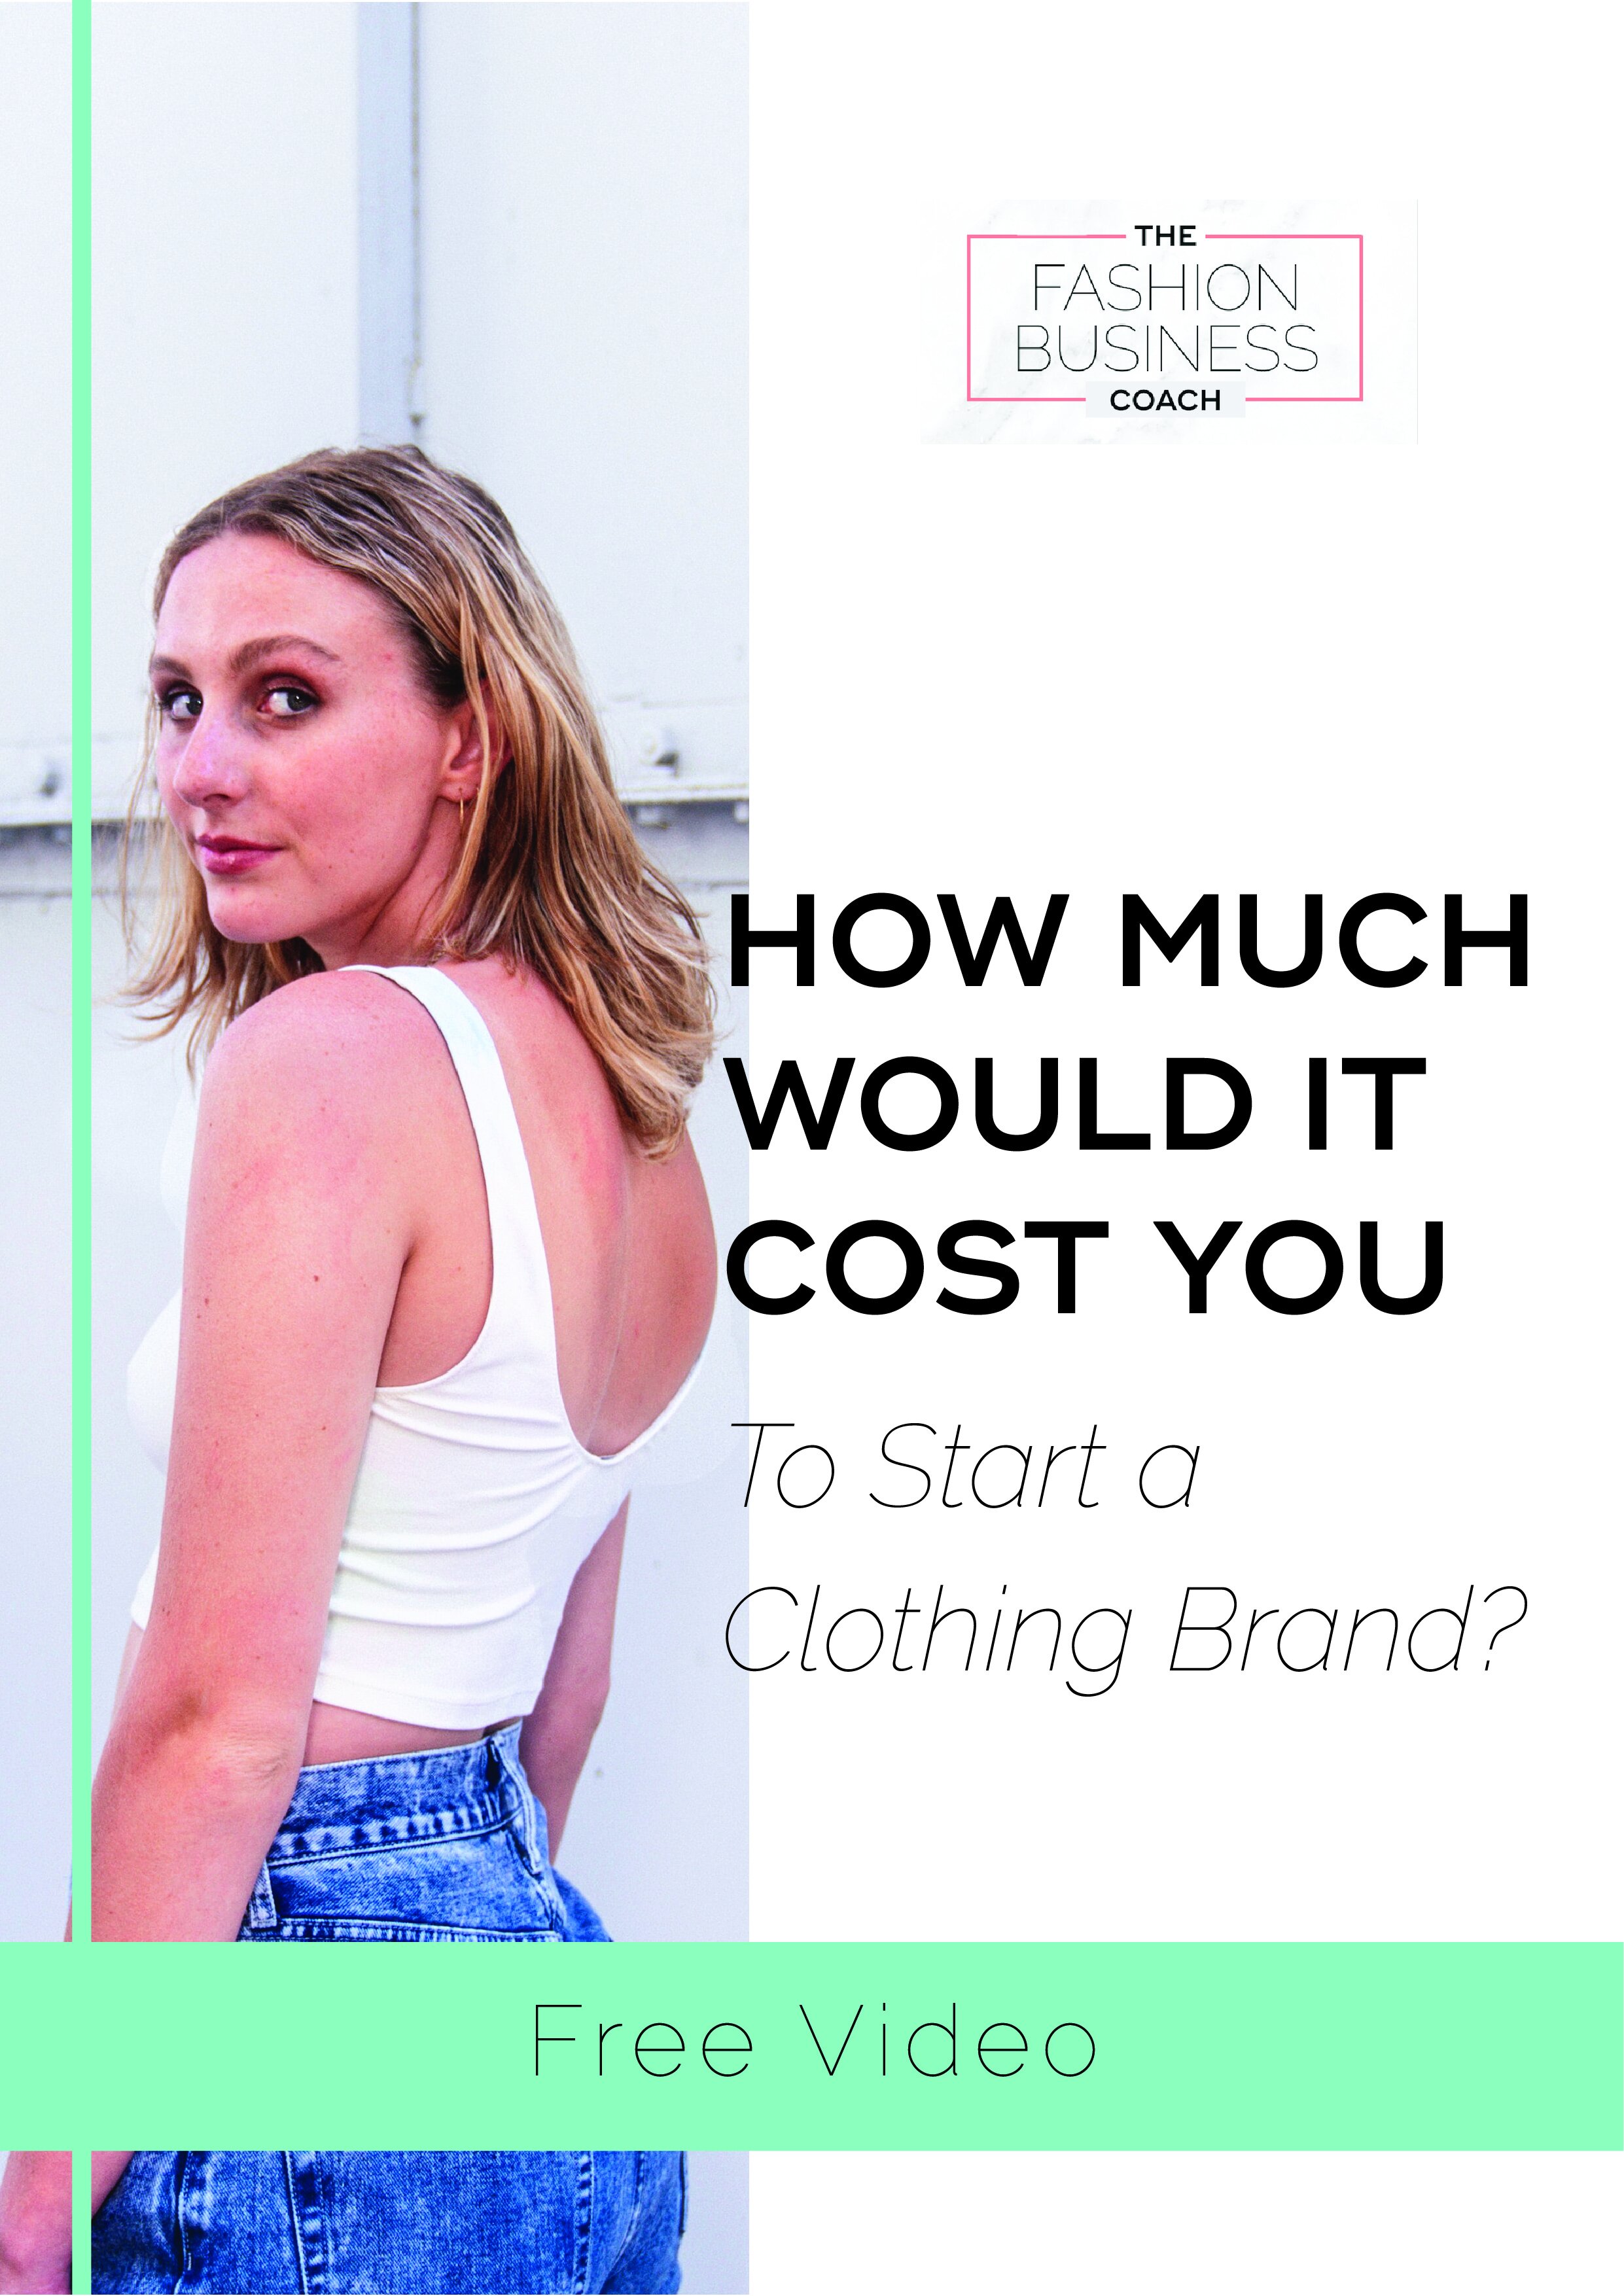 How Much Would it Cost You to Start a Clothing Brand 2.jpg